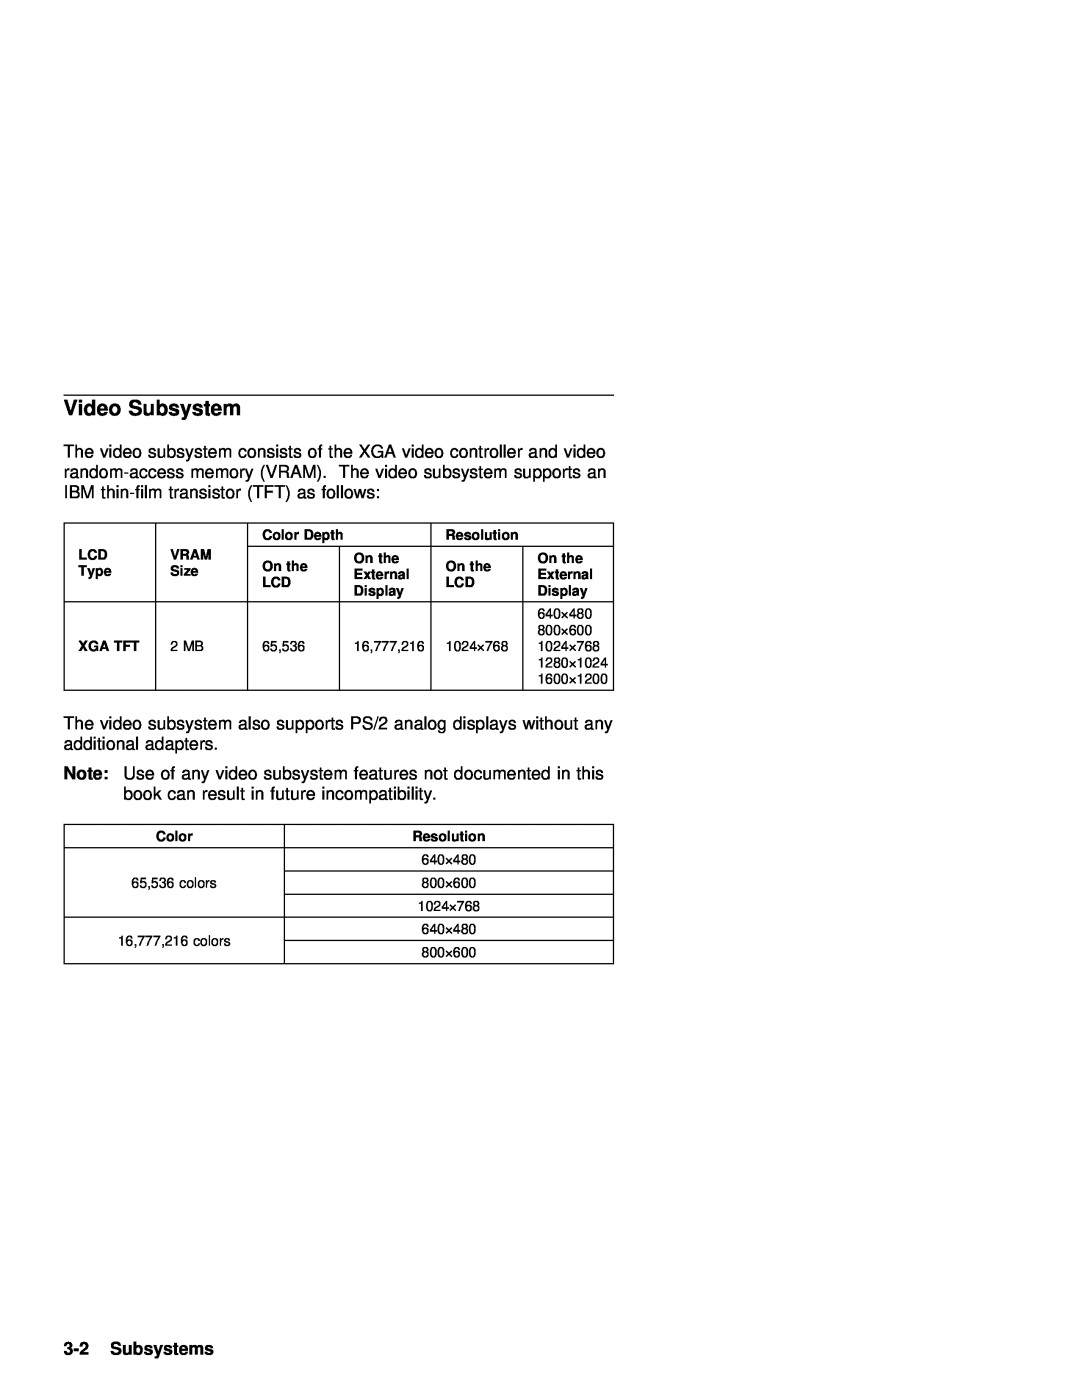 IBM 770 manual Video Subsystem, Note Use, Subsystems 